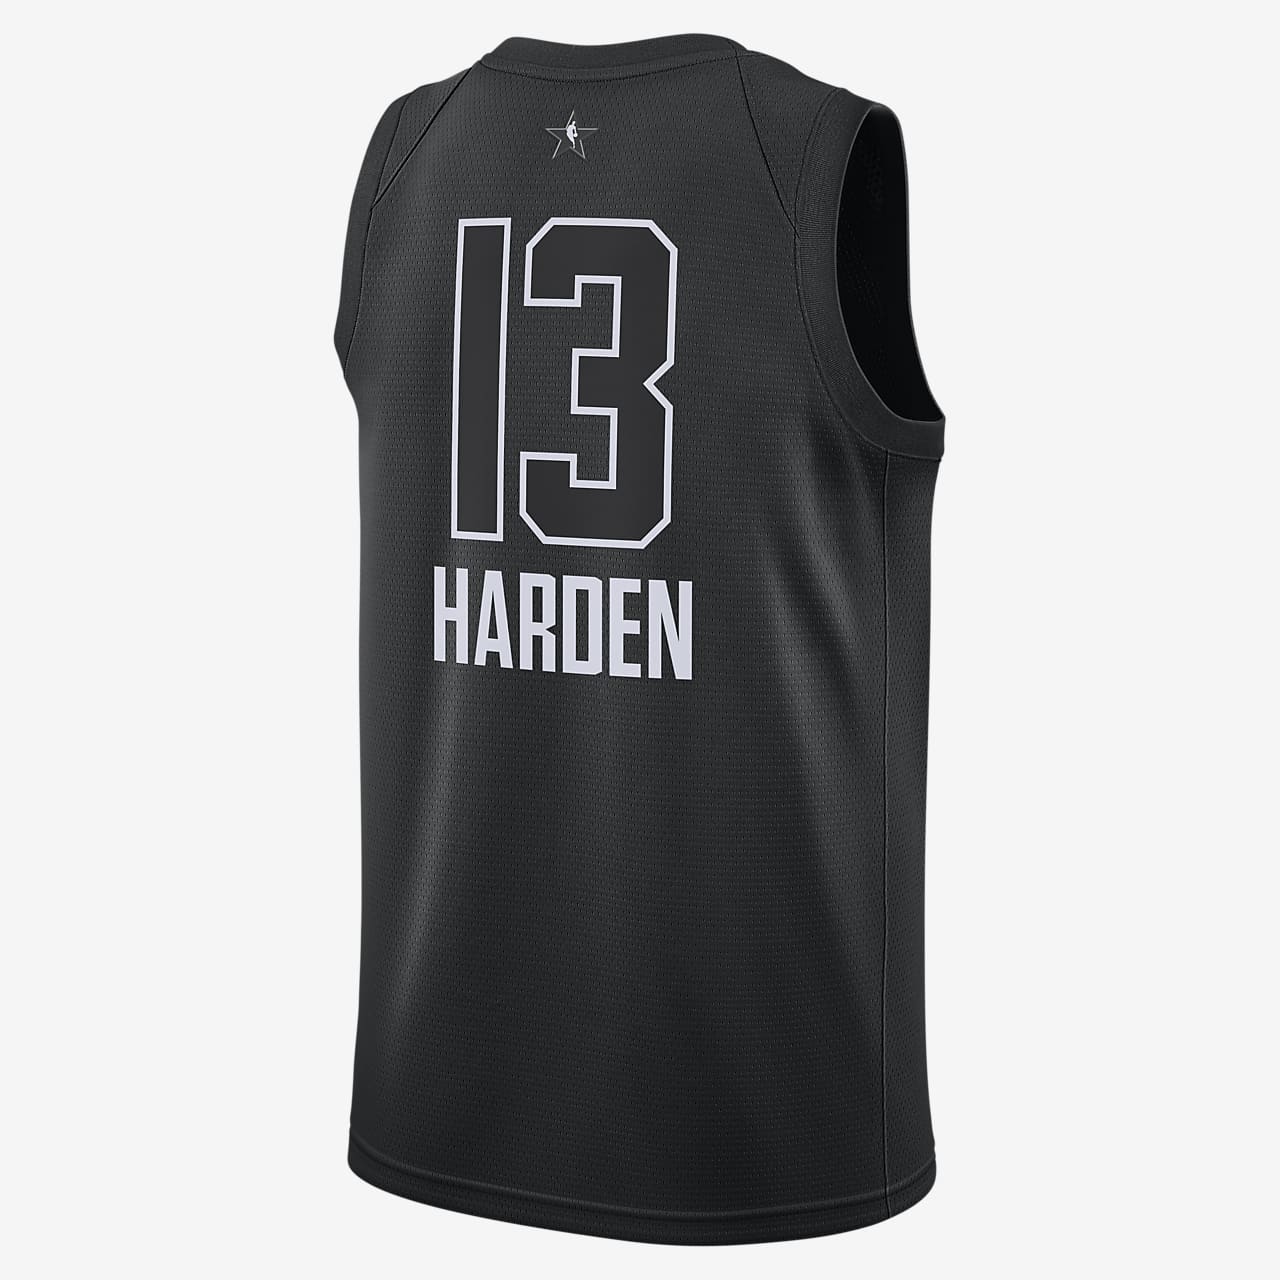 nike connected jersey not working